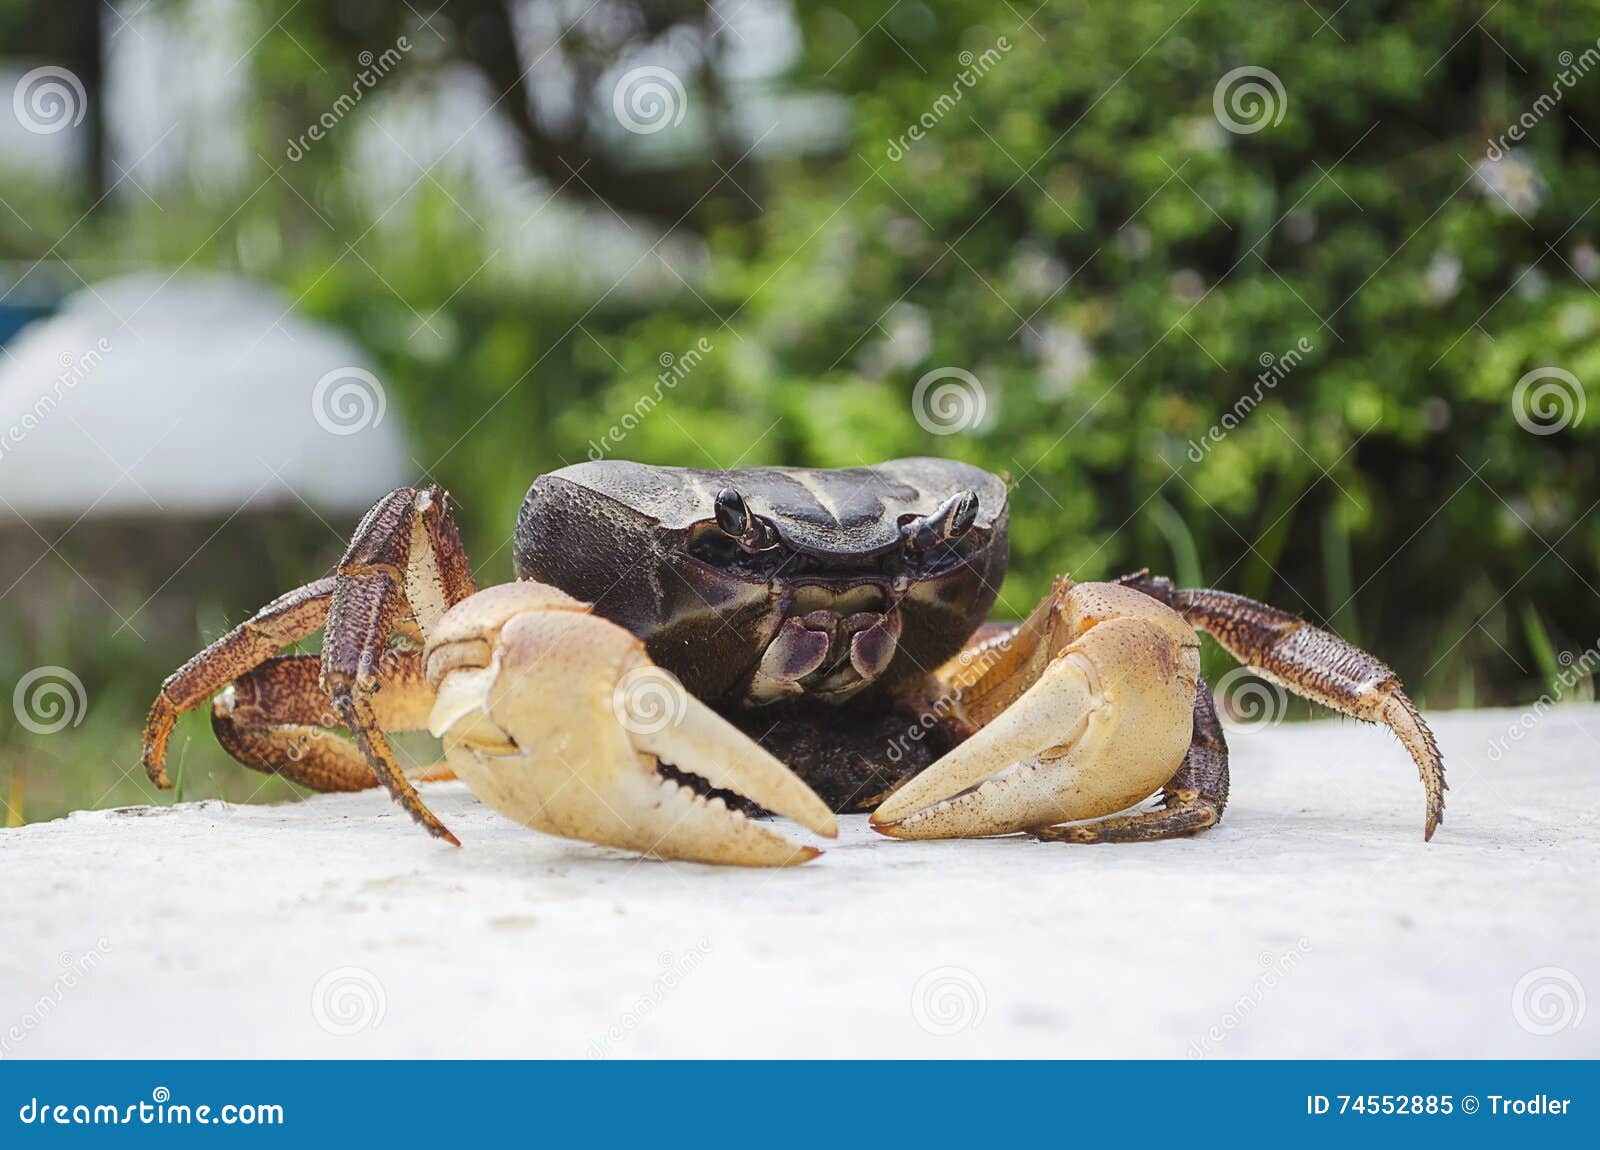 crab not coocked